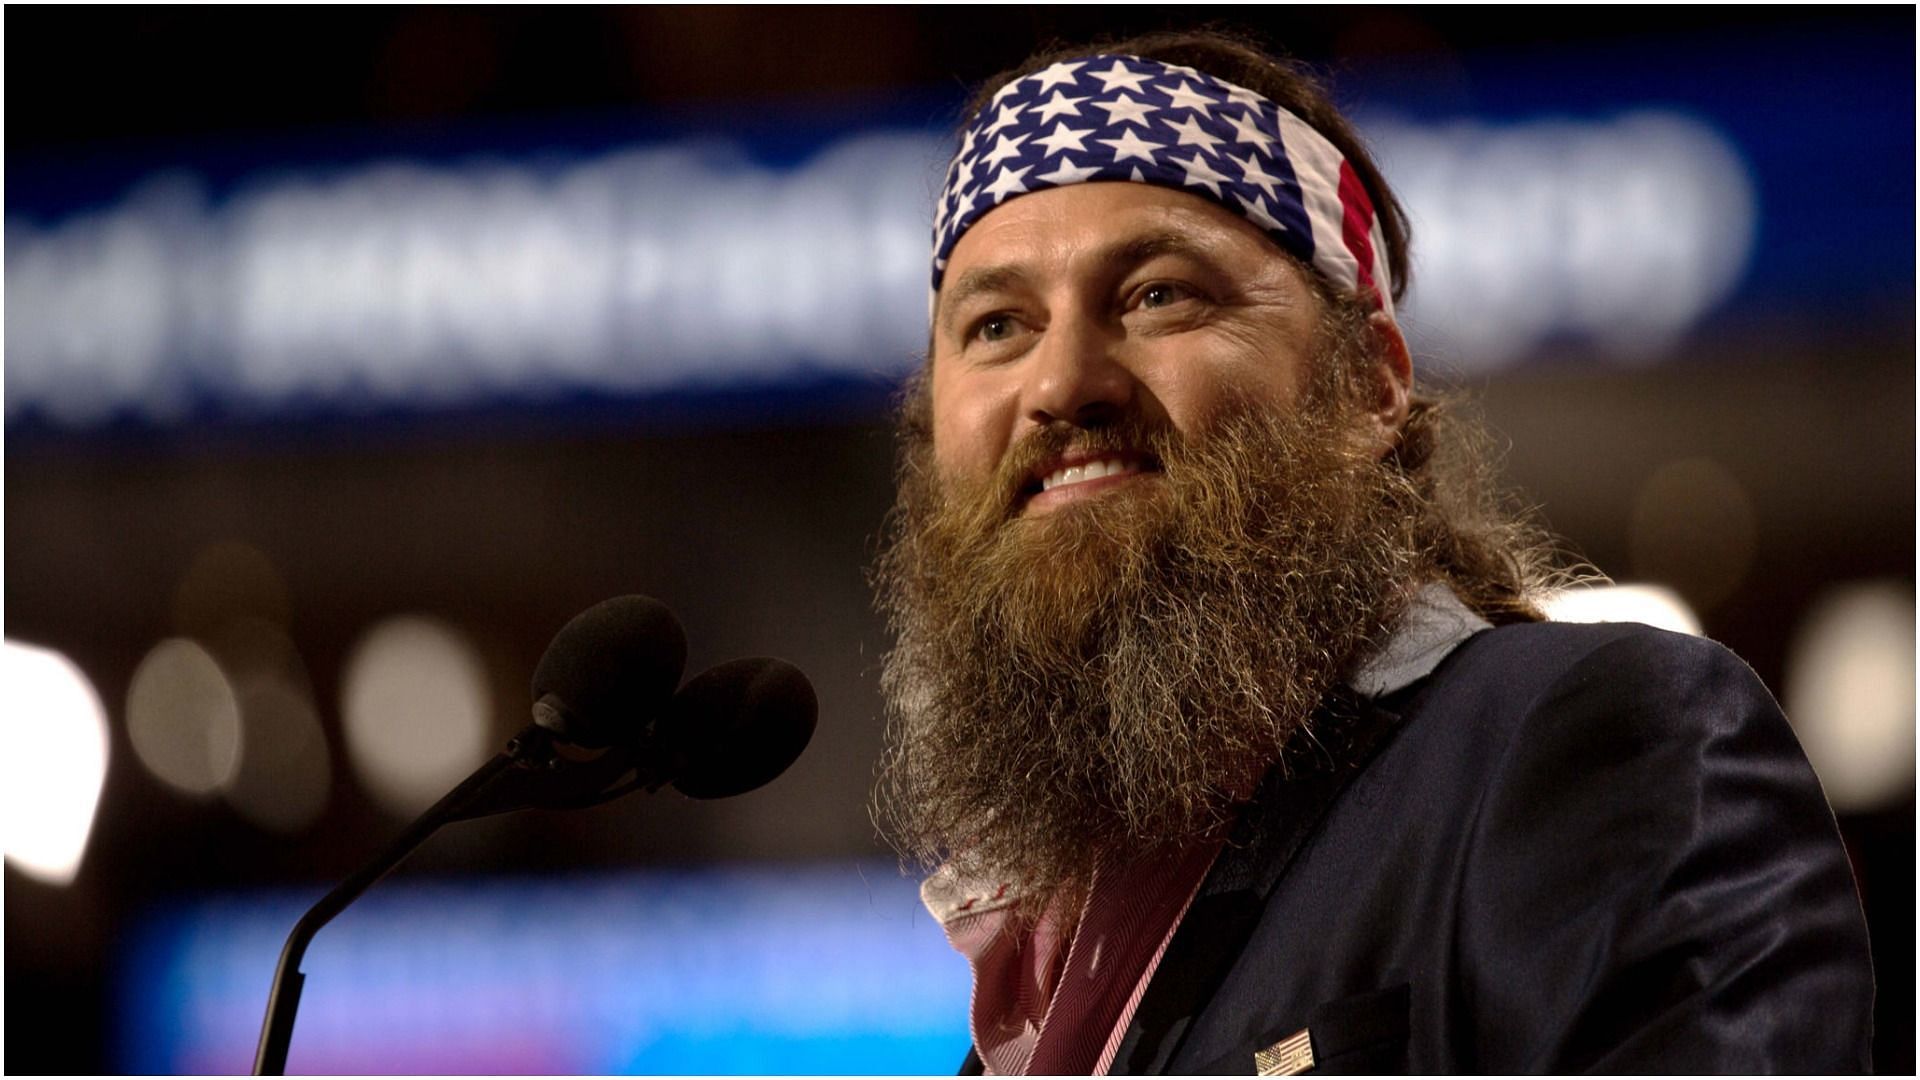 Willie Robertson&rsquo;s daughter recently welcomed her second baby (Image via David Hume Kennerly/Getty Images)